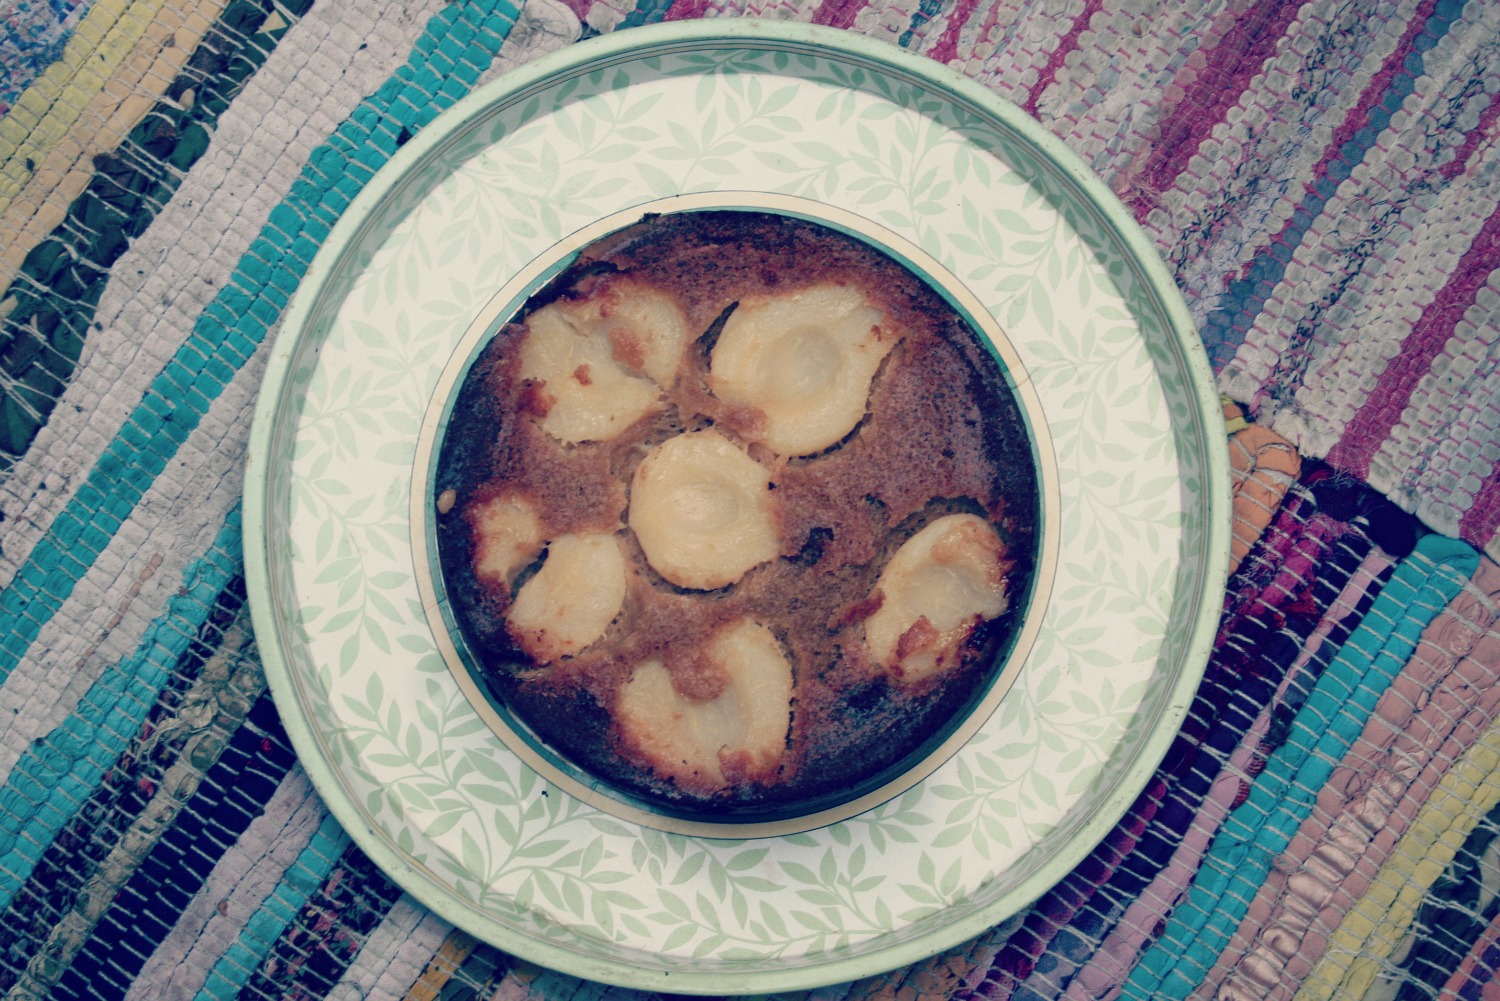 pear and ginger cake